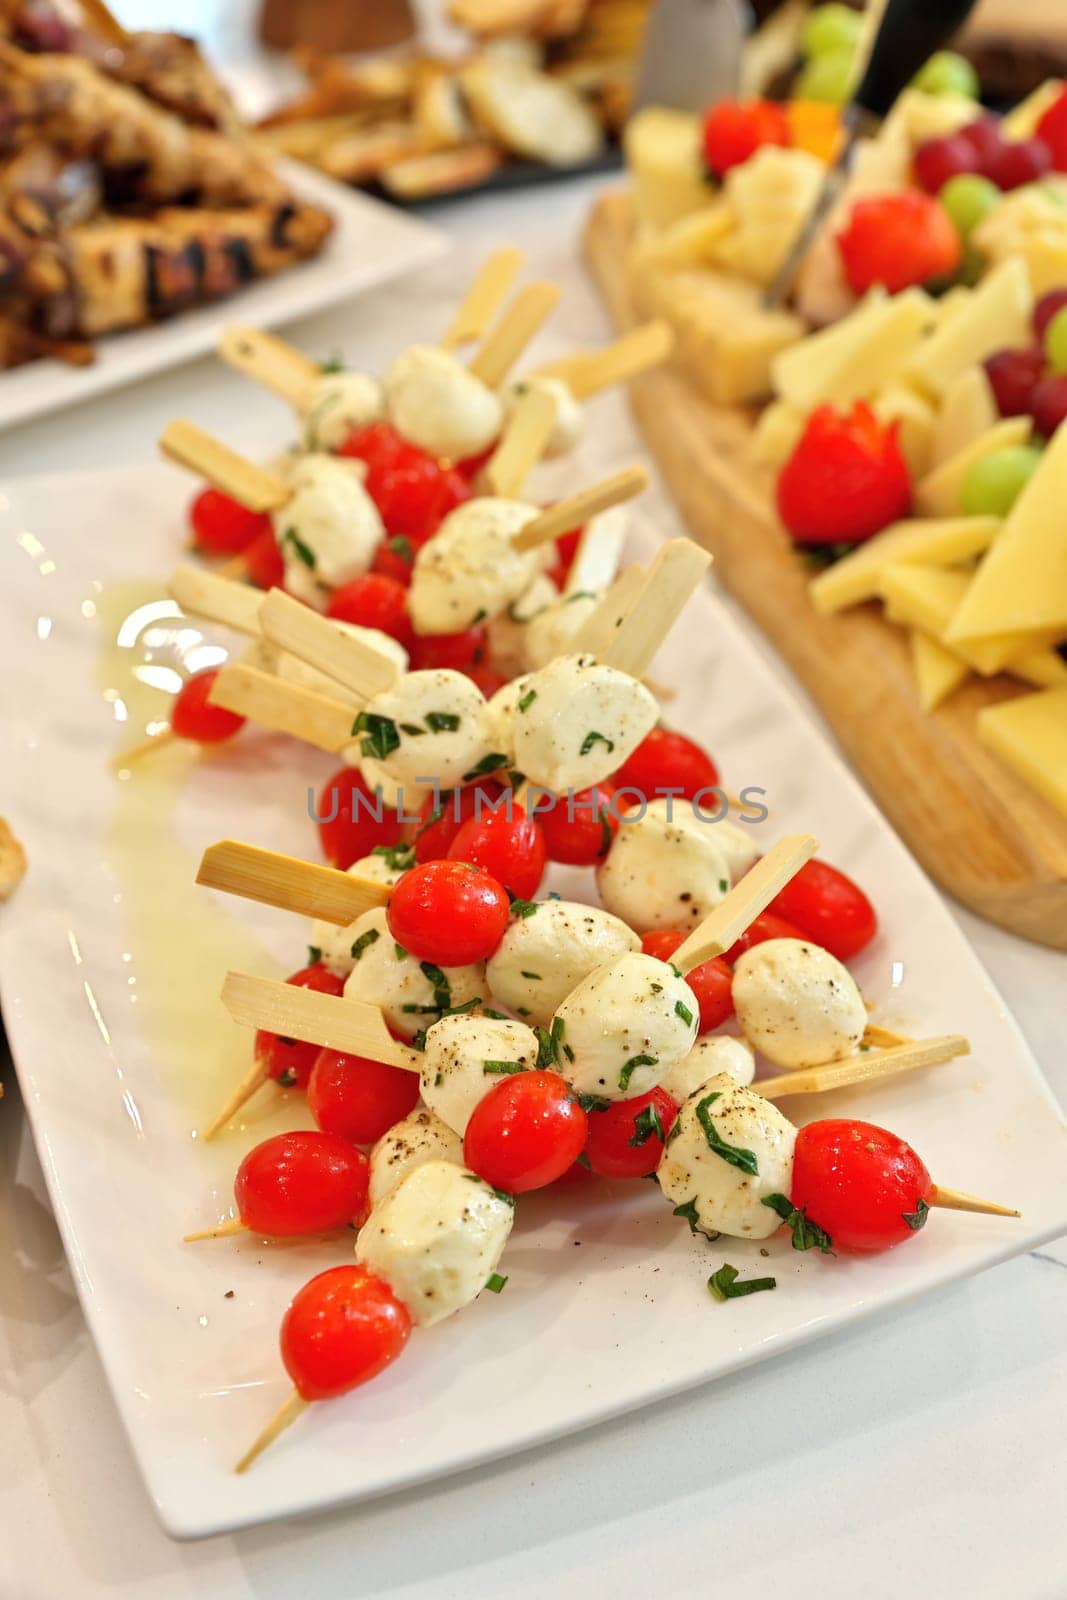 Caprese salad skewers made of cherry tomatoes, bocconcini, basil, and balsamic reduction by markvandam